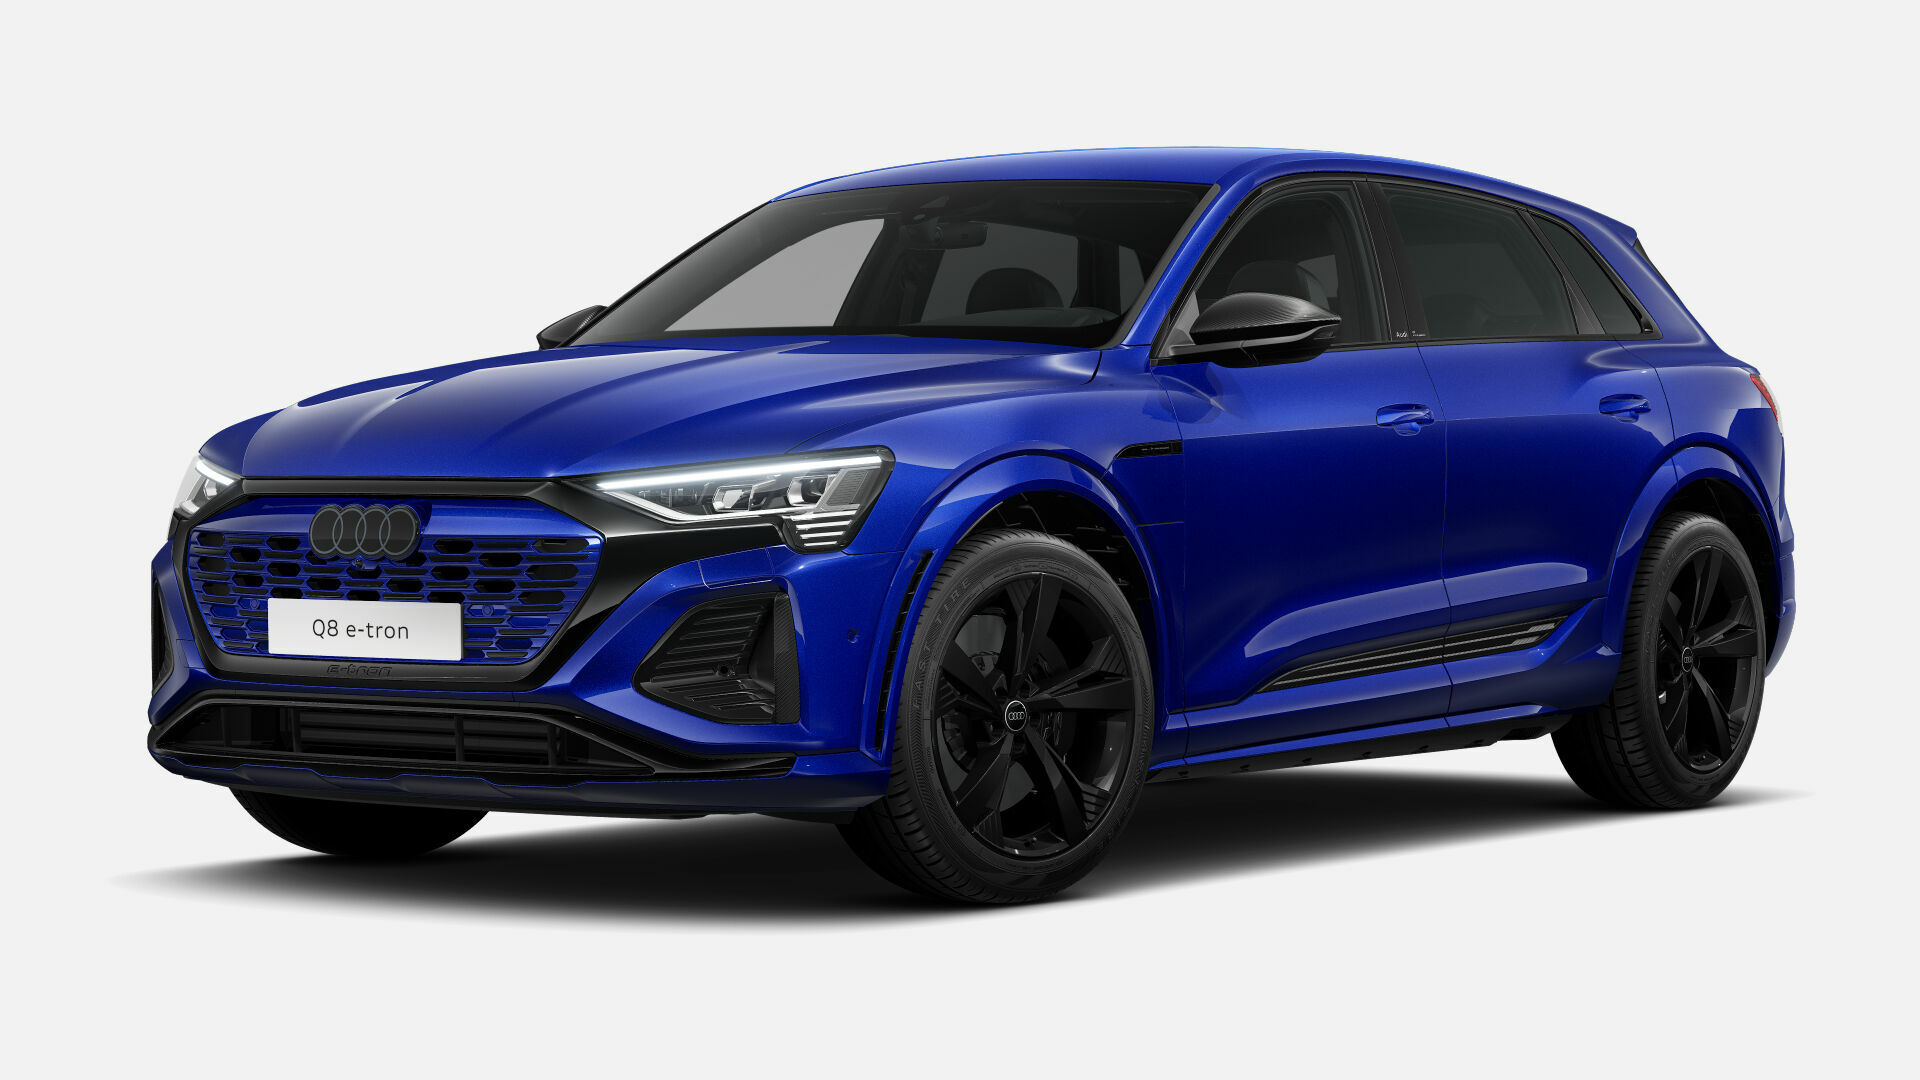 The Audi Q8 e-tron model series now has an even sportier appearance